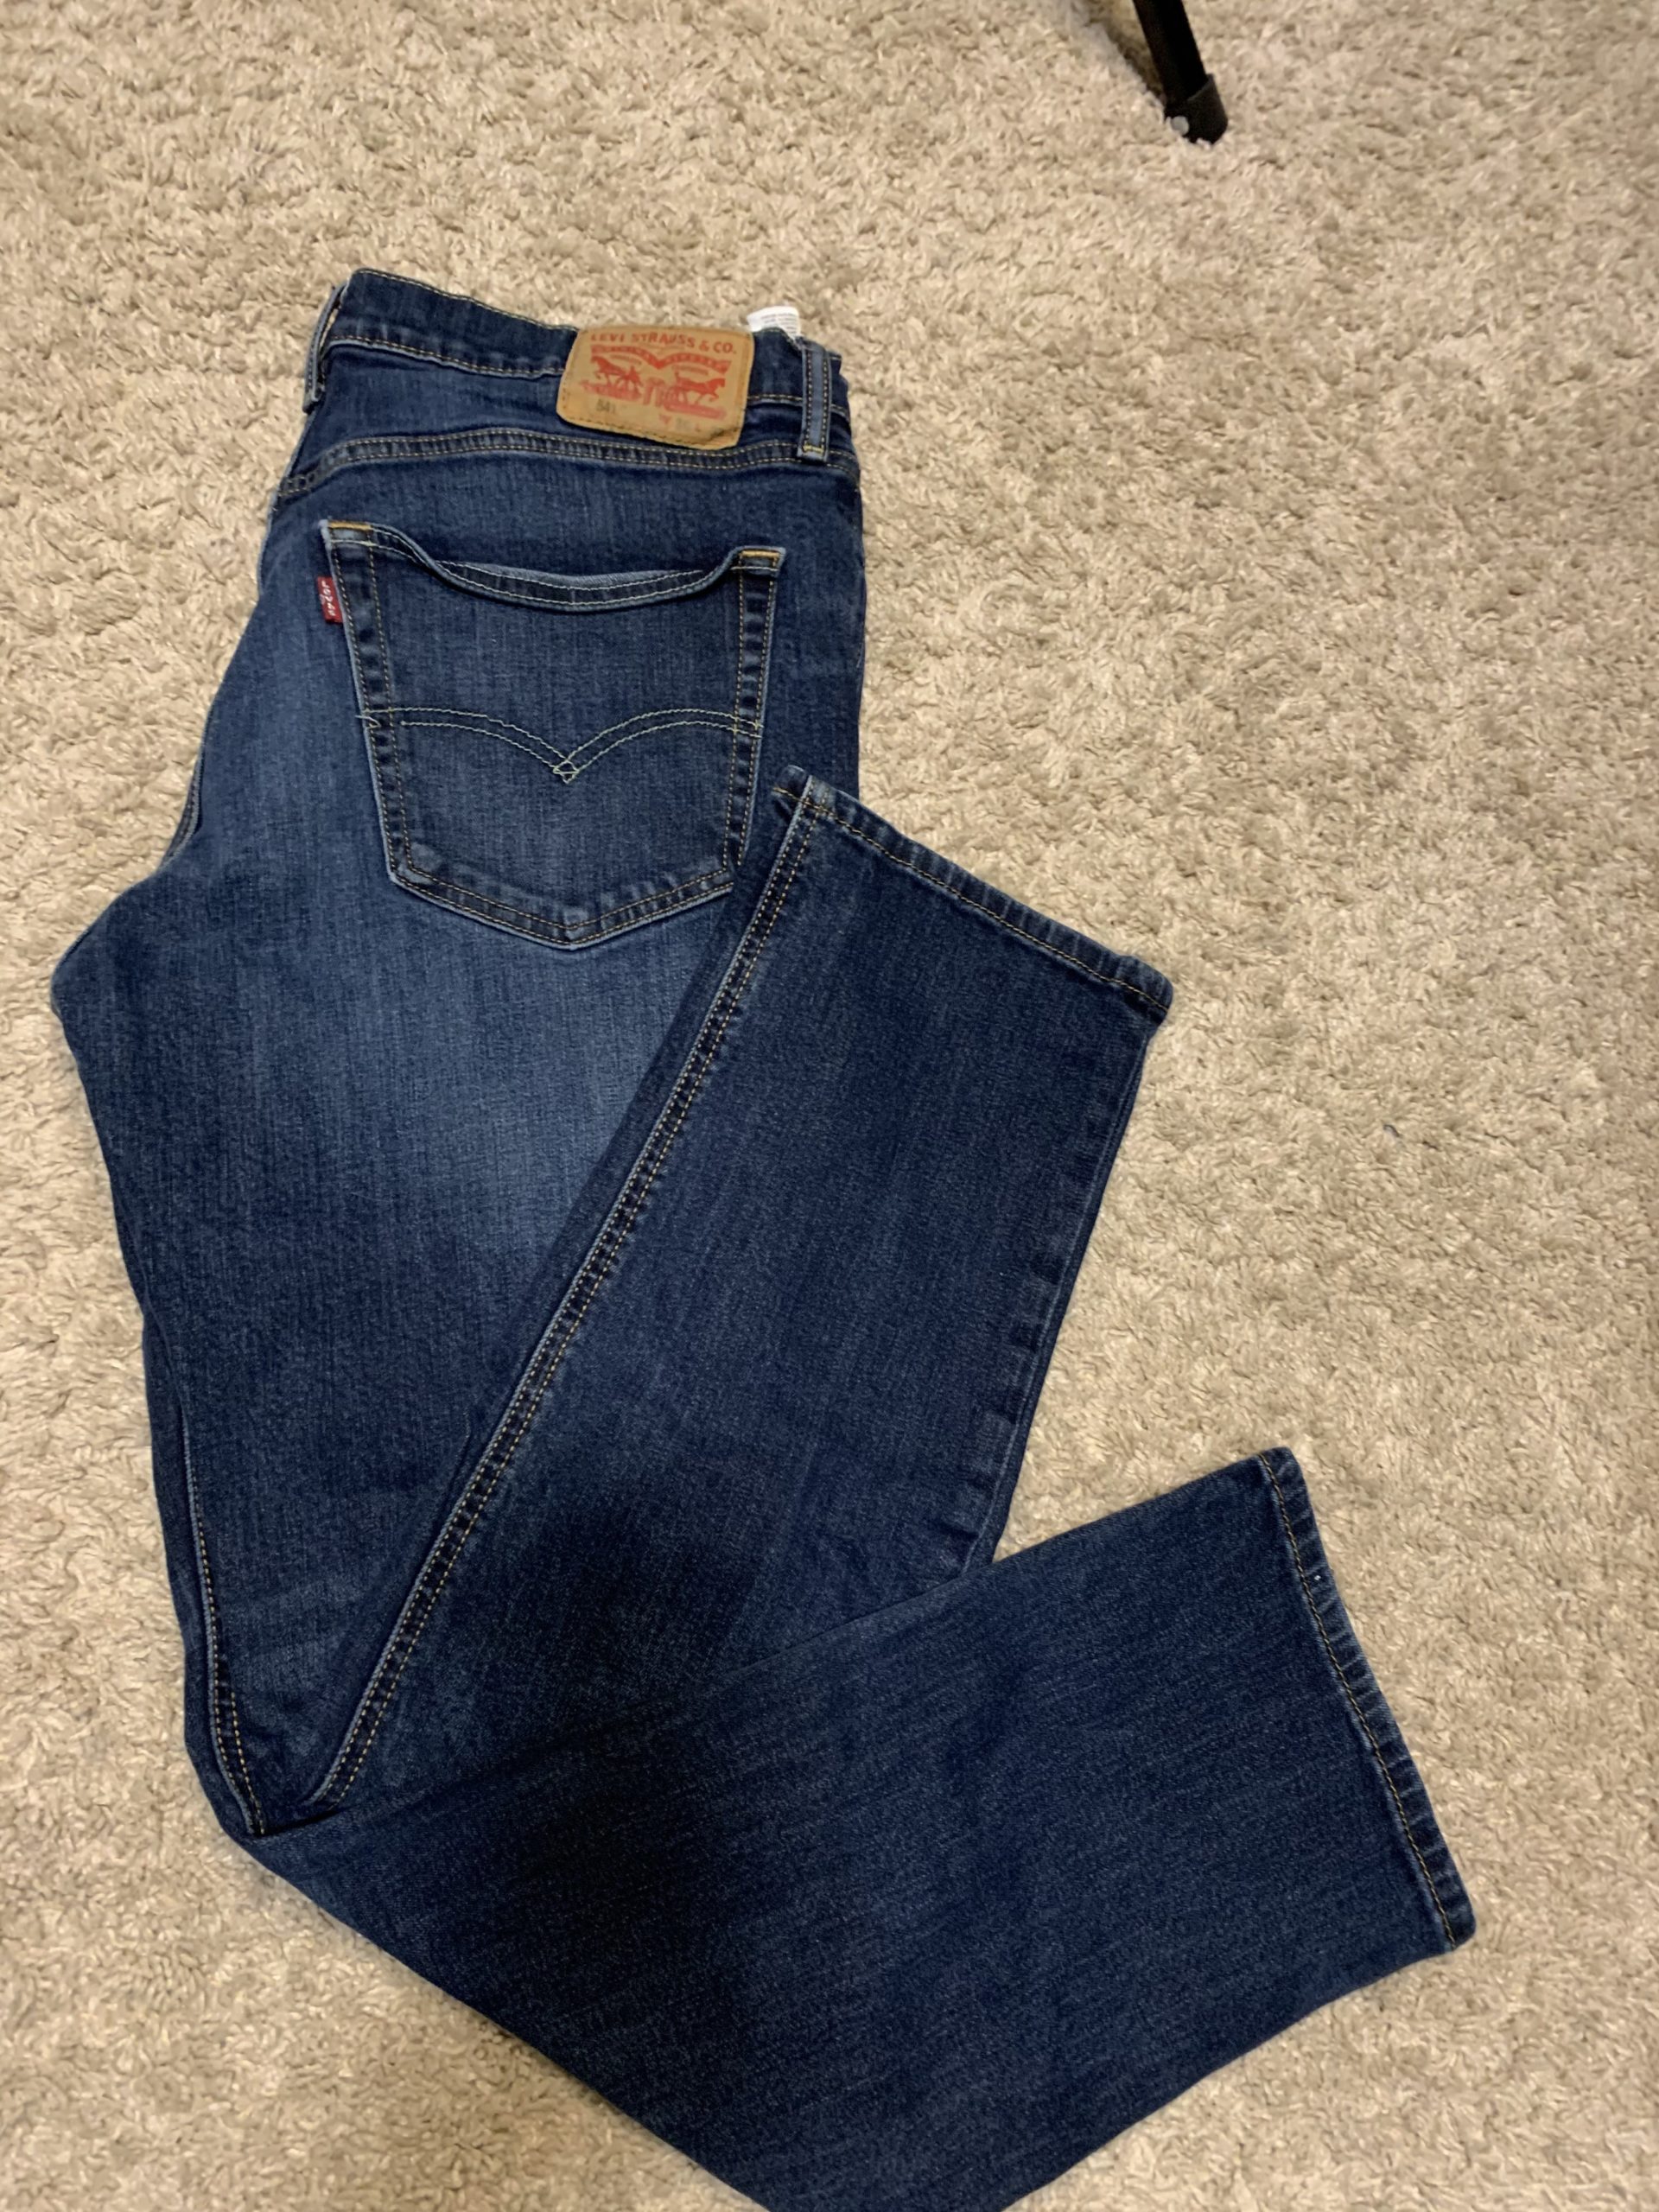 LEVIS 541 JEANS MENS NEW CONDITION W36 L32 ⋆ Twice as Nice Consignment  Boutique